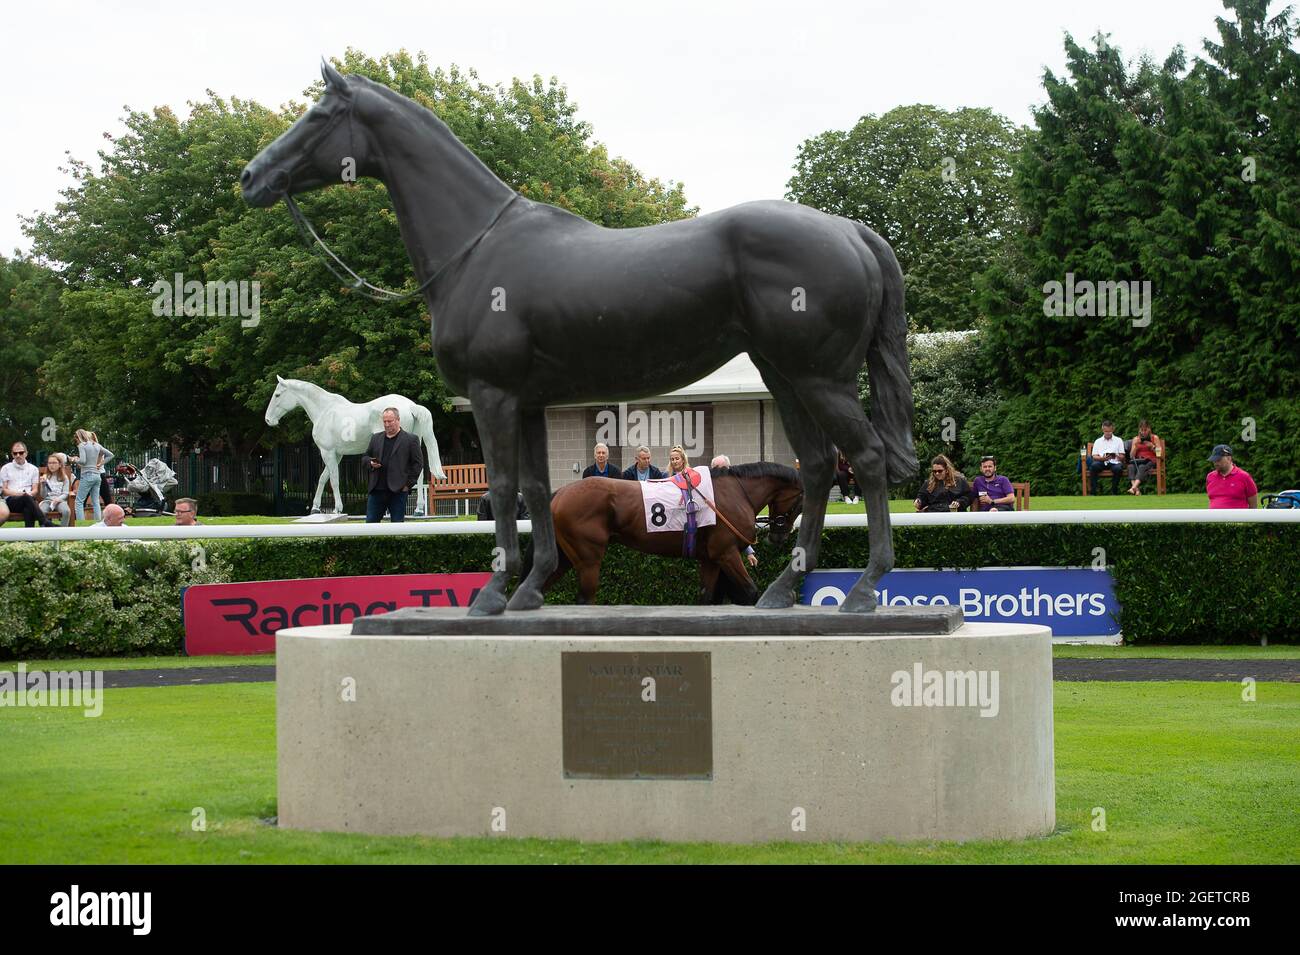 Sunbury-on-Thames, Middlesex, Uk. 20th August, 2021. Tio Mio in the Parade Ring before the Unibet New Instant Roulette Novice Stakes (Class 5). Trainer David Loughnane, Tern Hill. Credit: Maureen McLean/Alamy Stock Photo